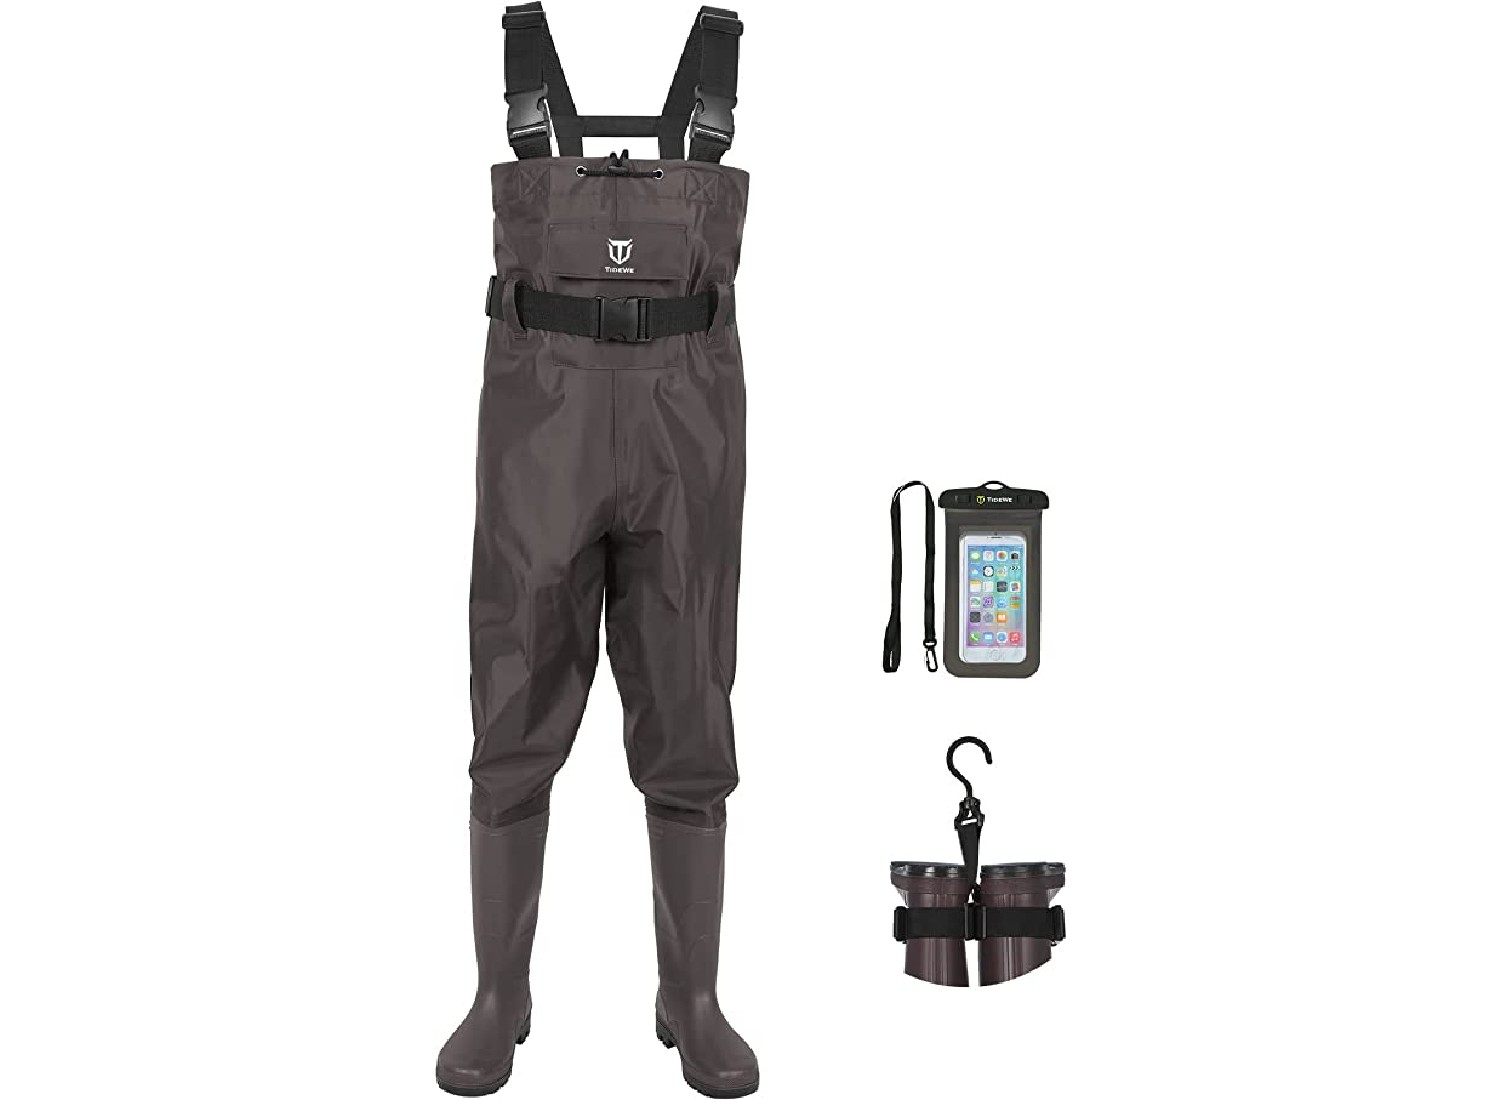 The Best Fishing Waders To Use on Your Next Fishing Trip